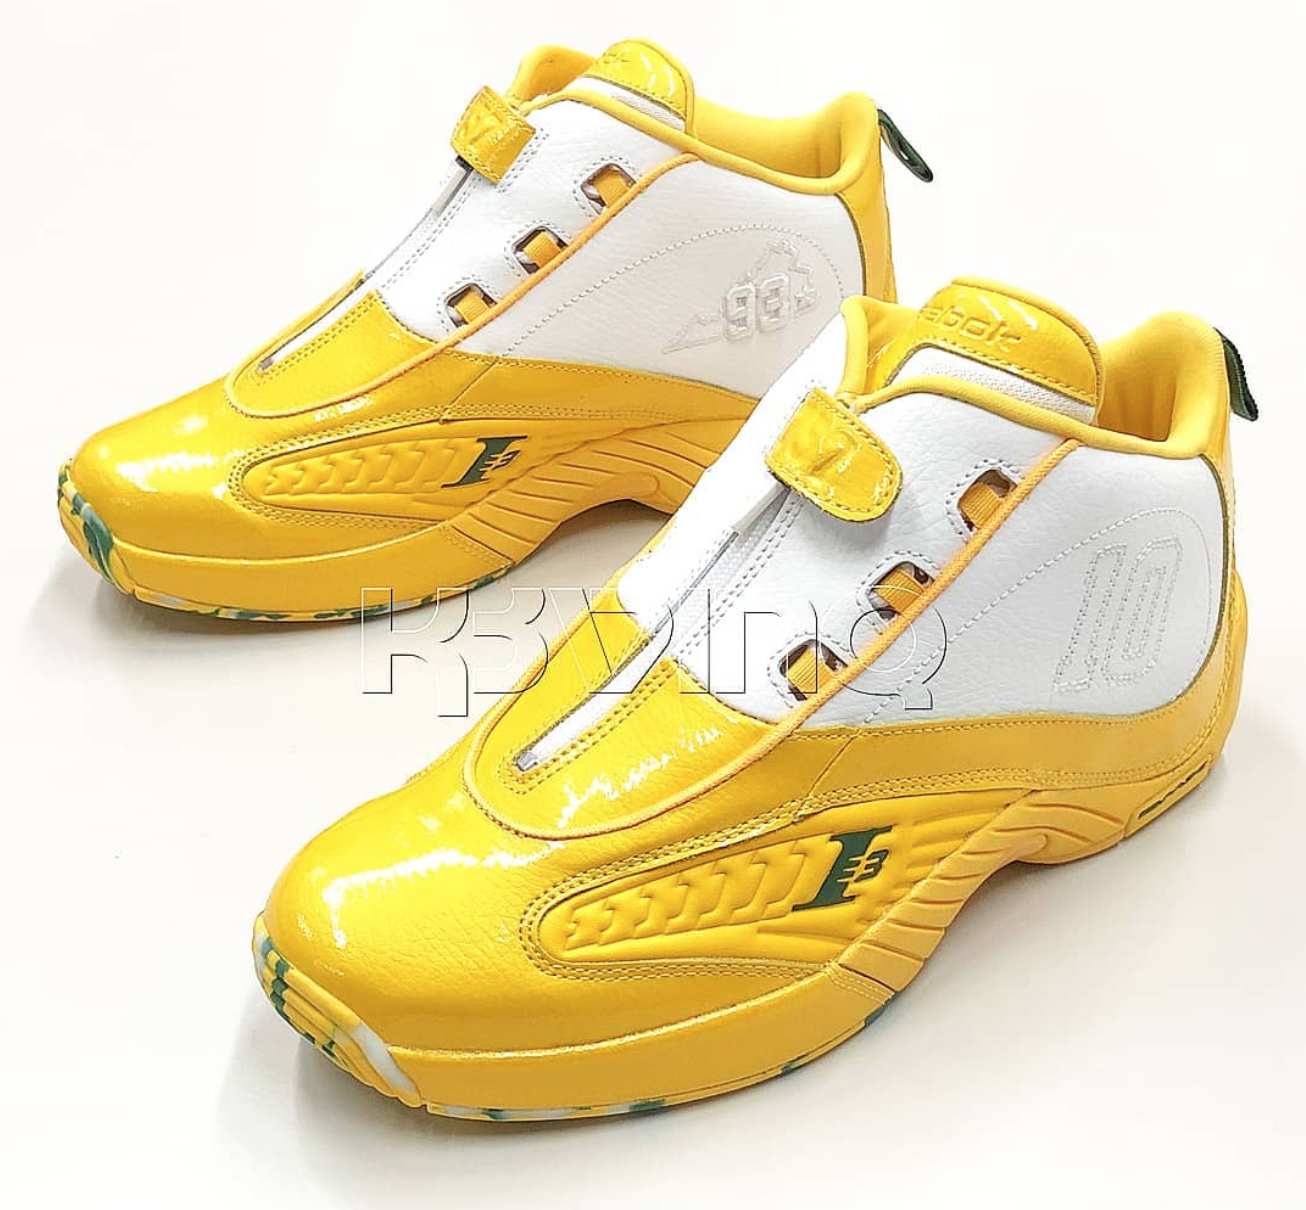 The Bethel Bruins Receive Answer IV PEs Inspired by Allen Iverson ...